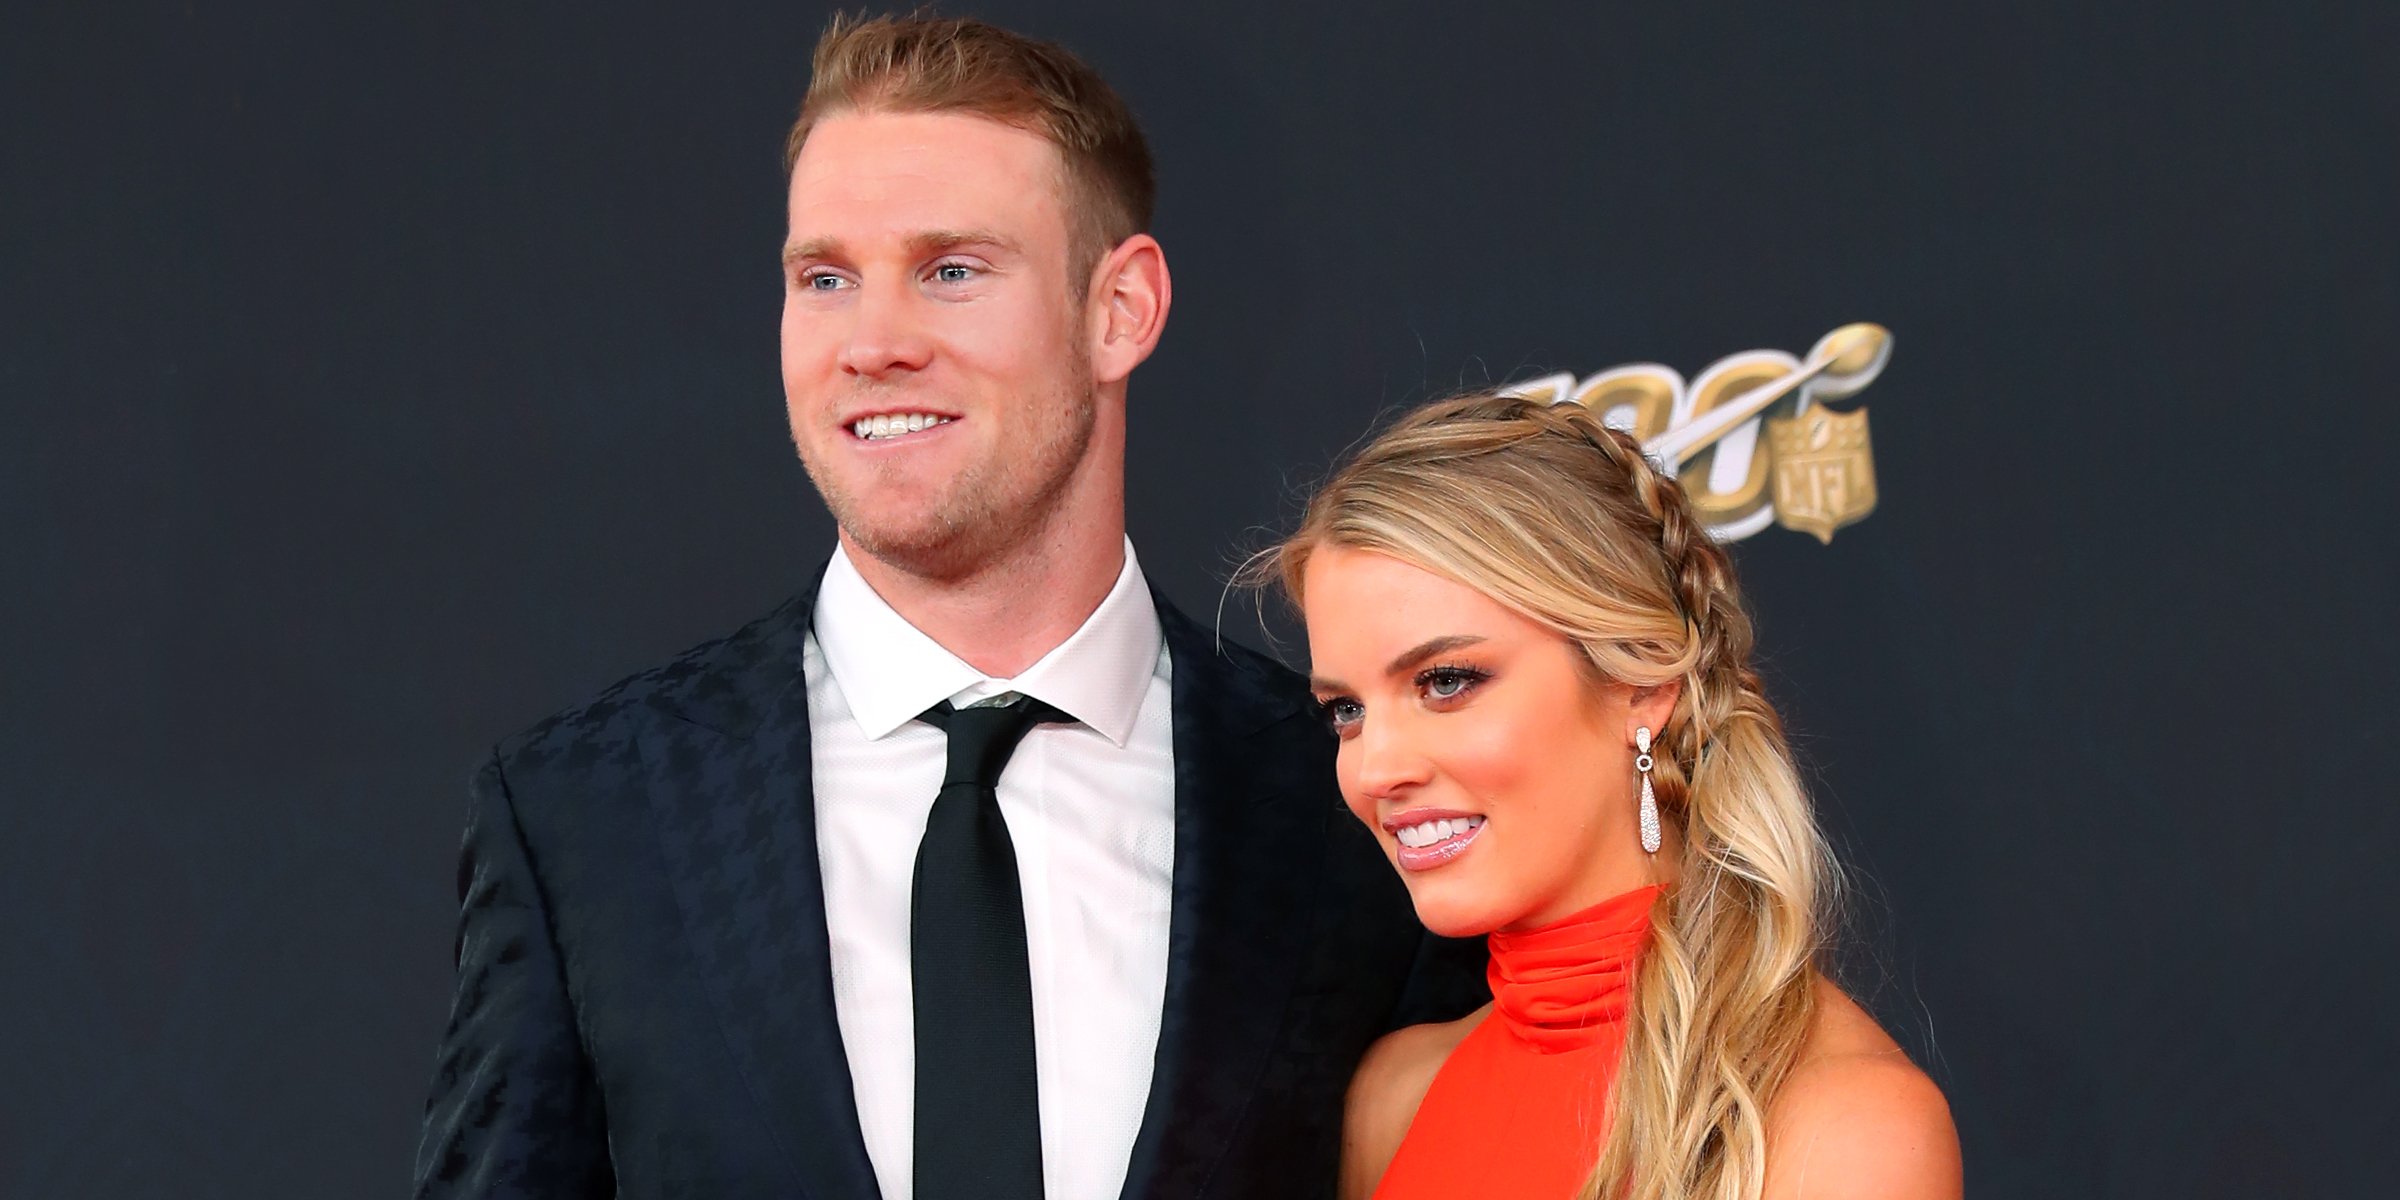 Ryan Tannehill and his wife Lauren Tannehill | Source: Getty Images